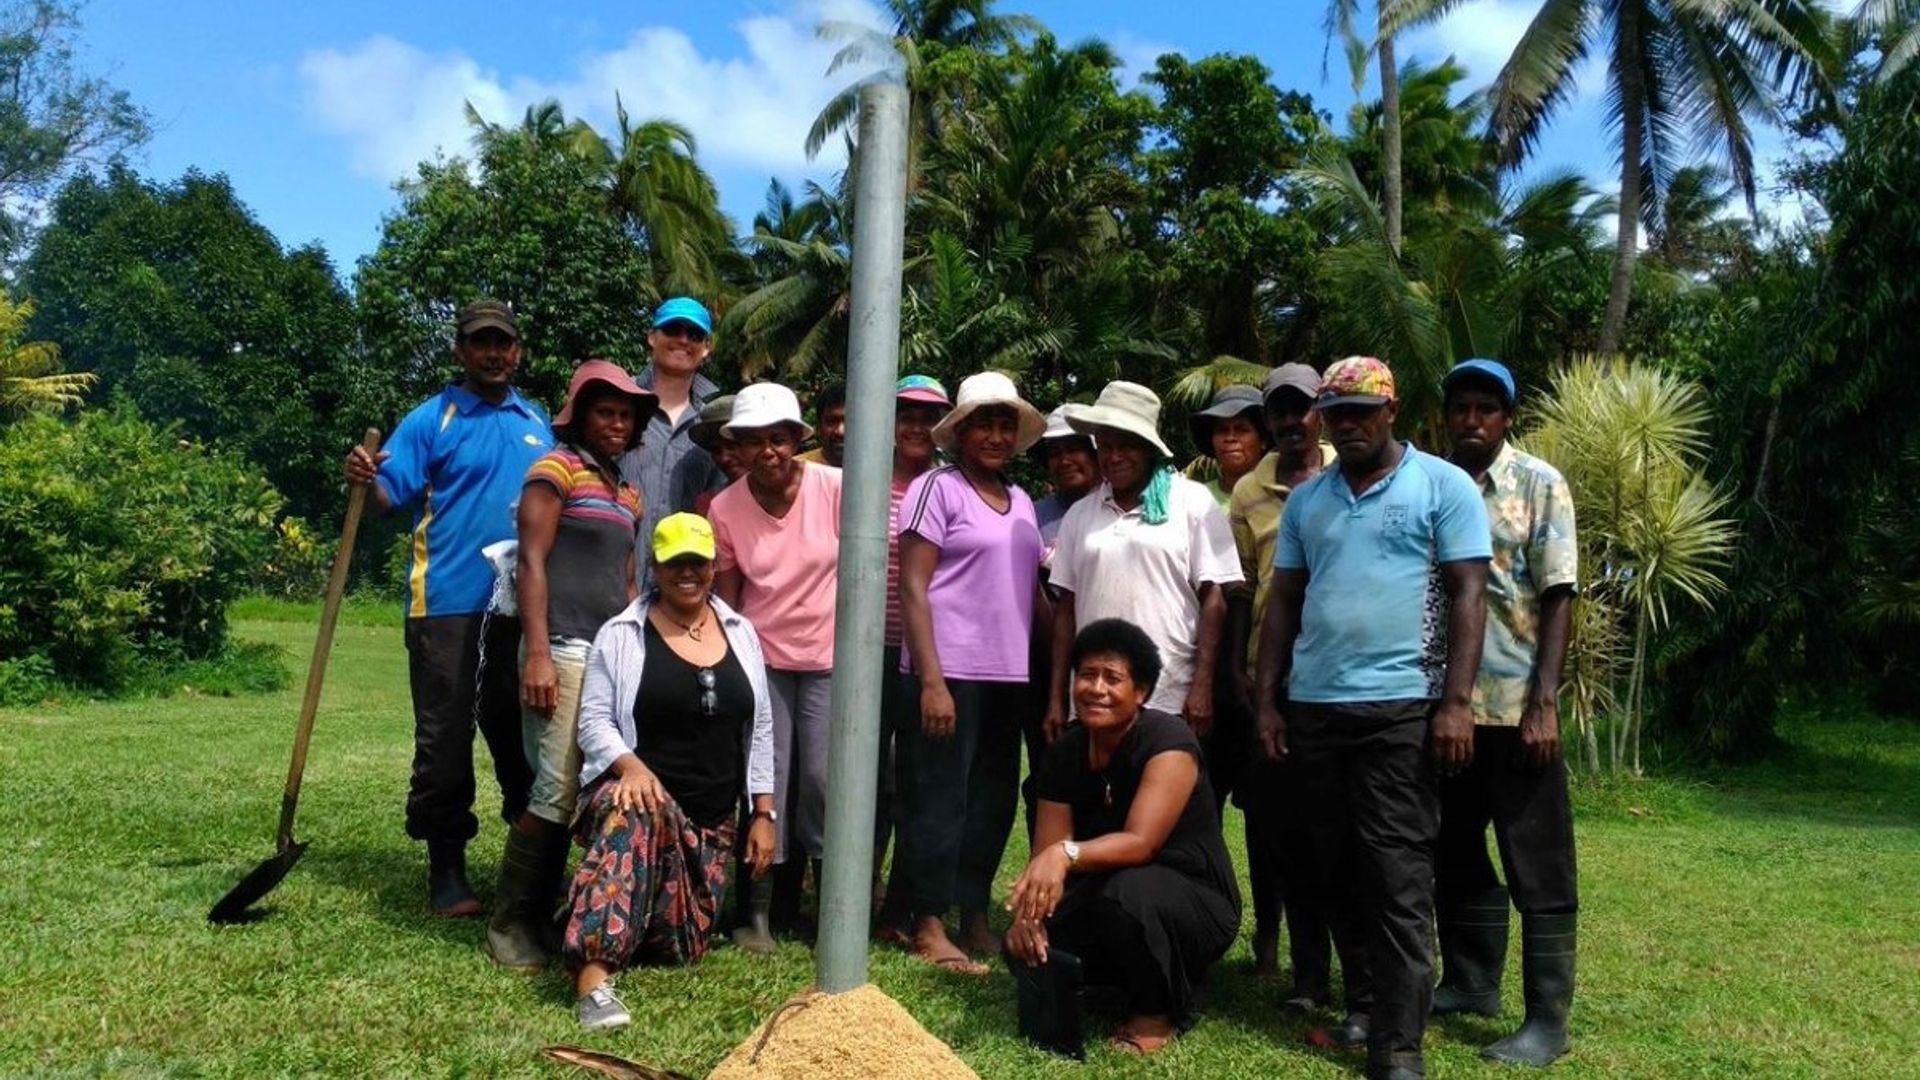 Workers from Ranadi Plantation Partnership, the first farm in Fiji to achieve GLOBALG.A.P. certification